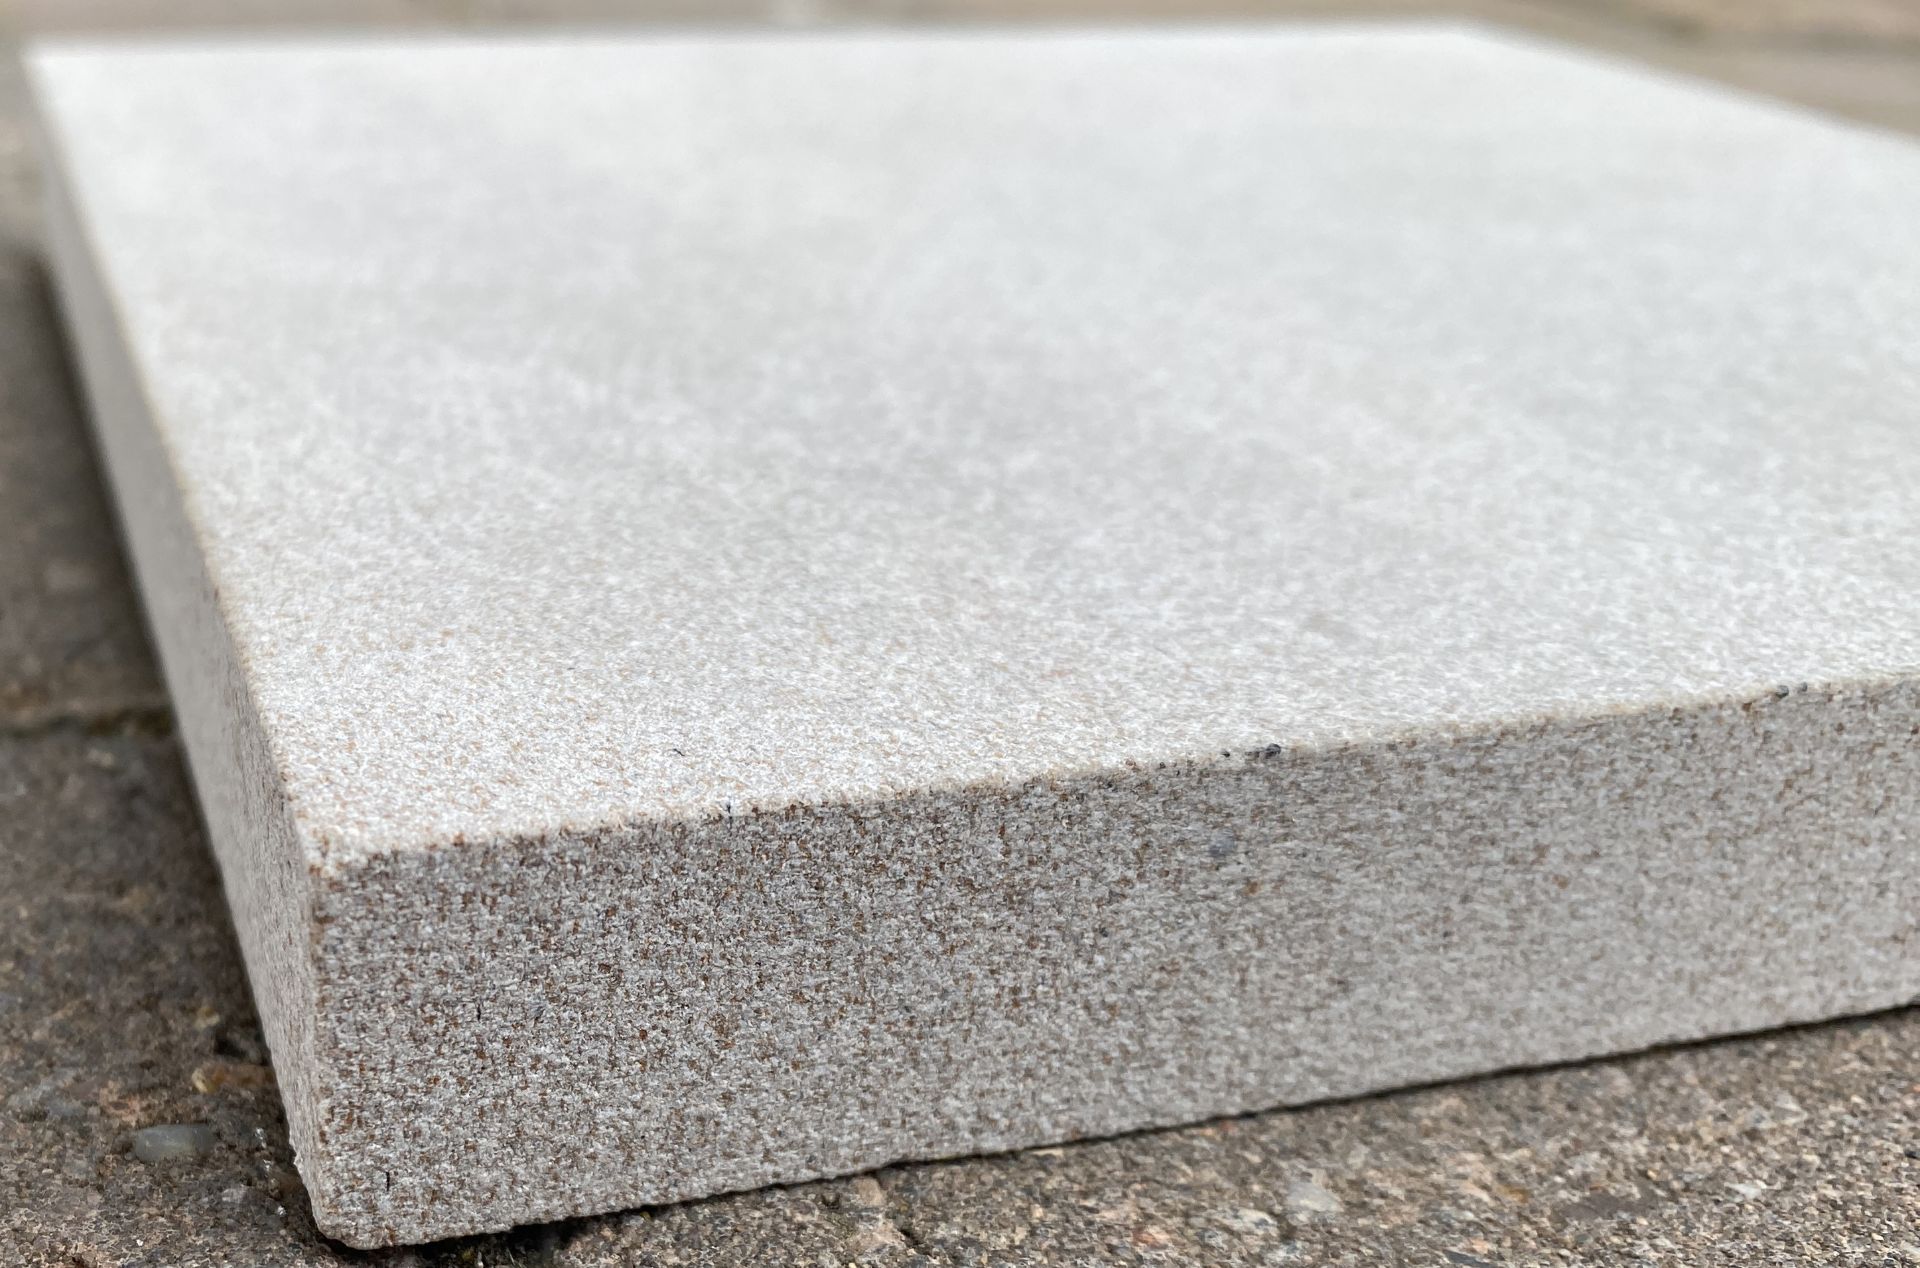 Contents to 3 pallets of BLOCKSTONE MOUSELOW NATURAL SANDSTONE, RUBBED FINISH FACING/PATIO STONE. - Image 6 of 8